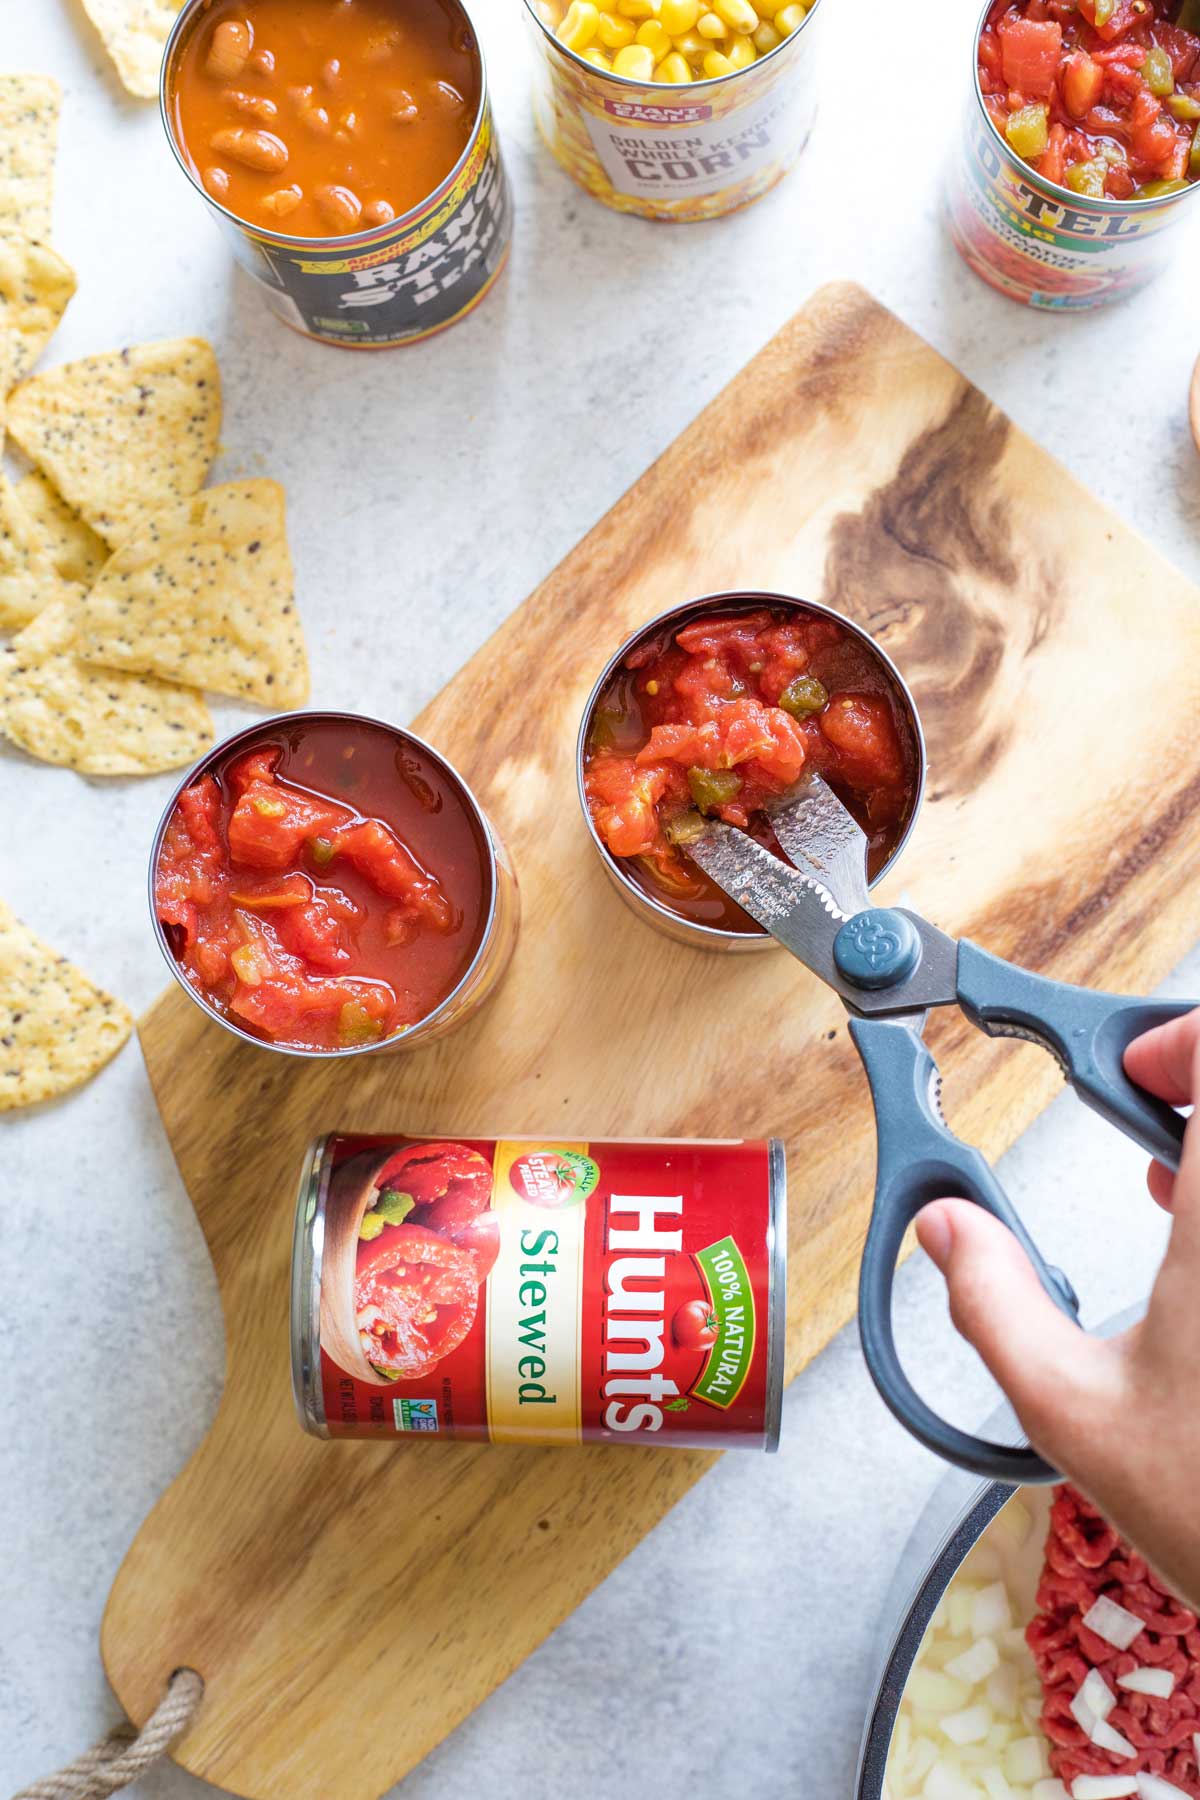 Hand using kitchen scissors to chop tomatoes still in can, with other cans of ingredients, soup pot and taco chips surrounding.